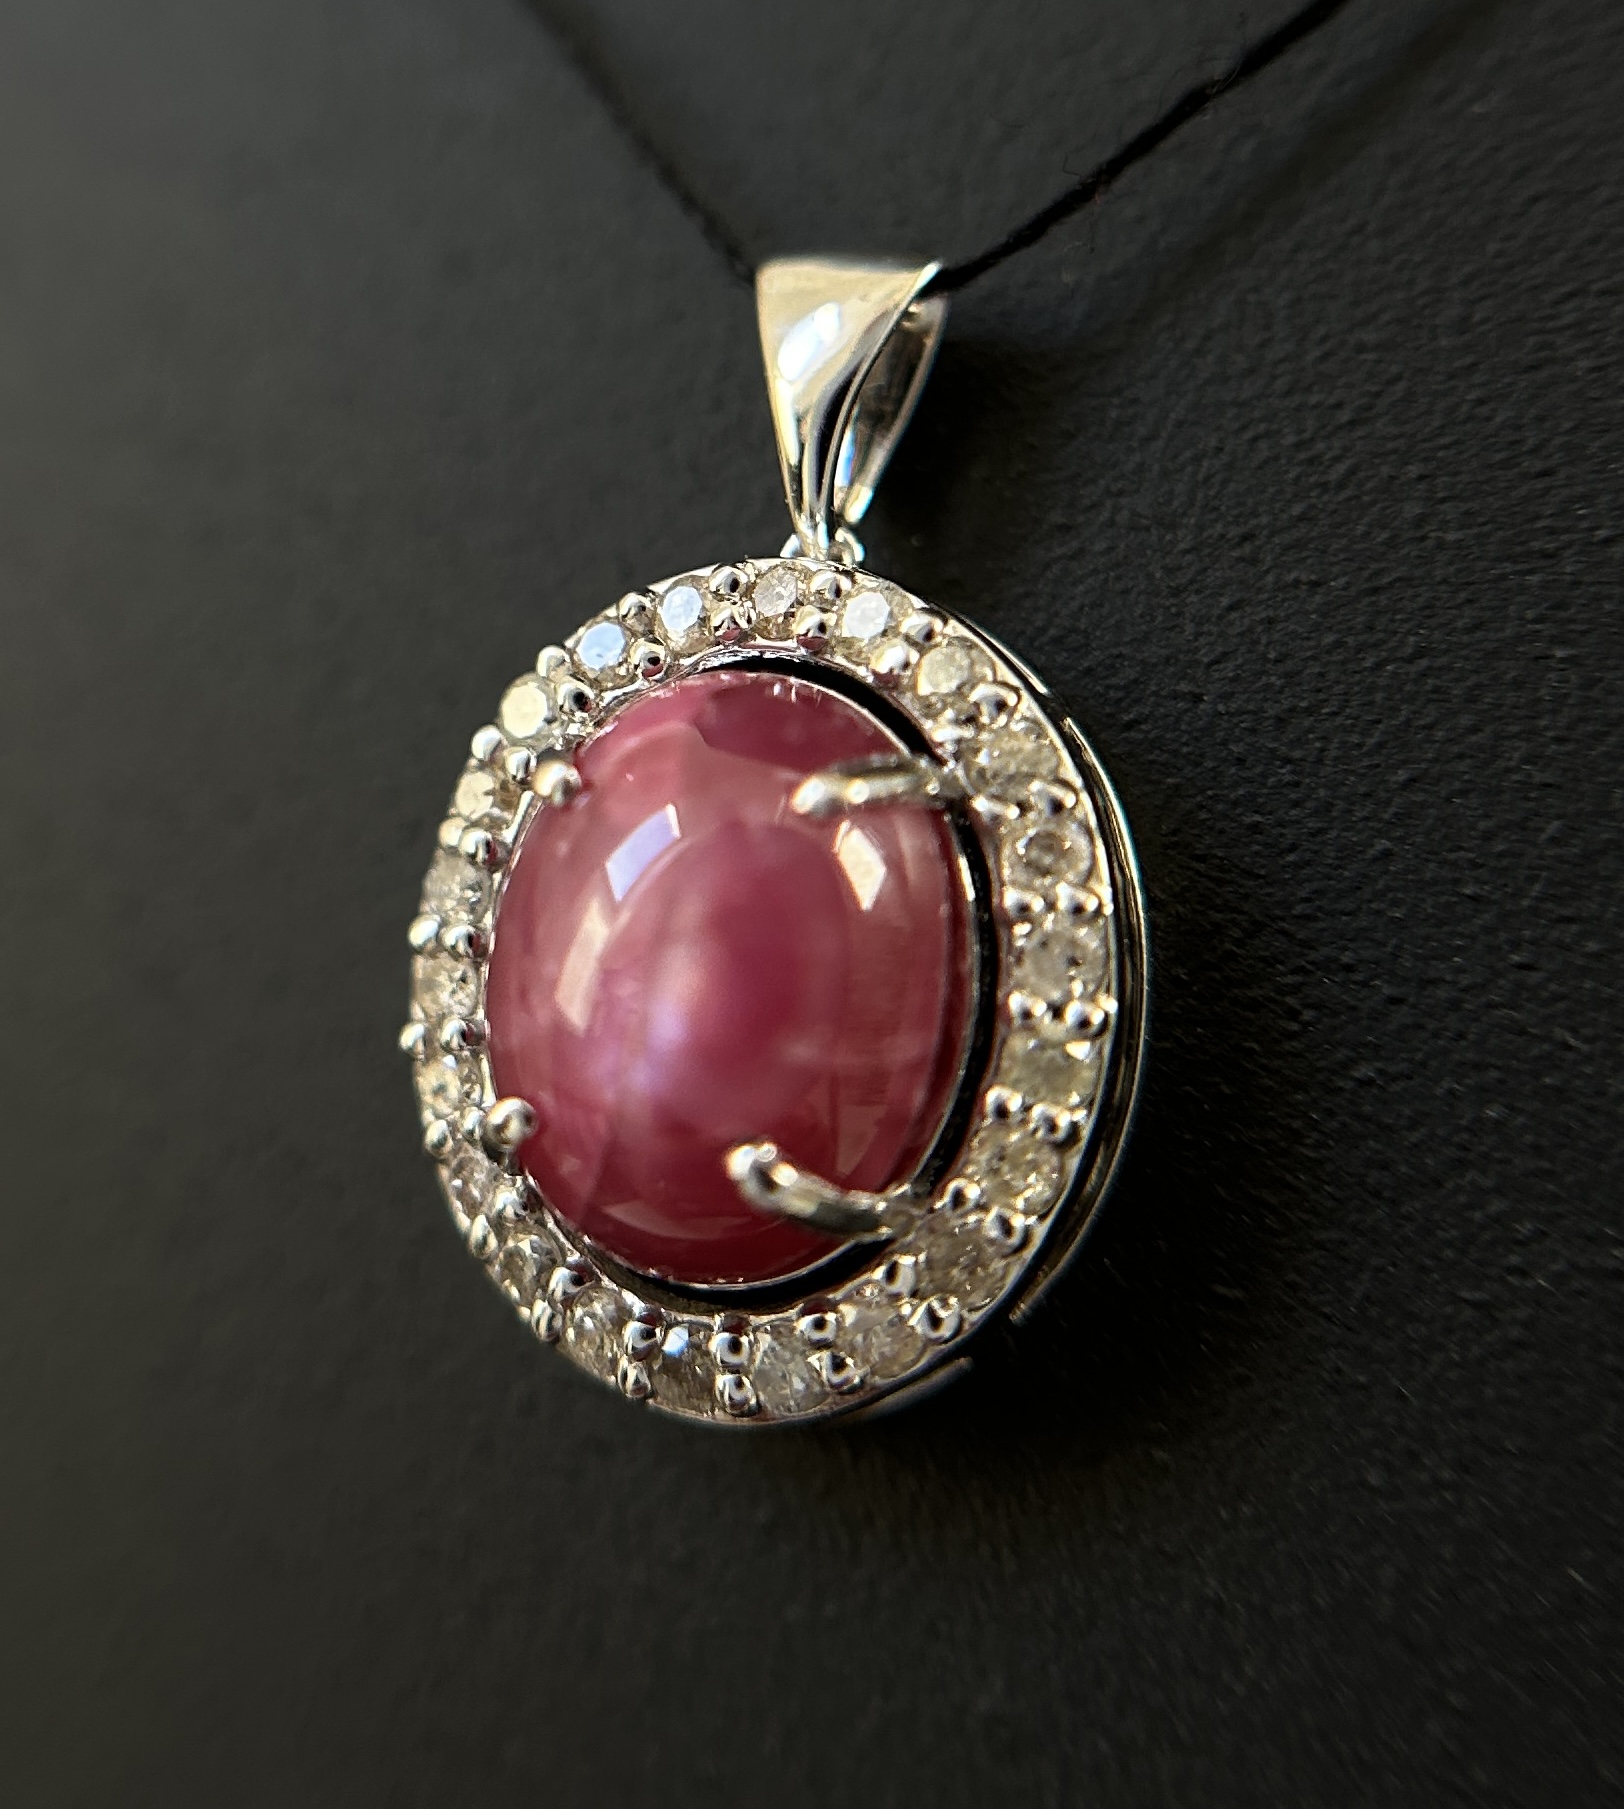 Beautiful Natural Star Ruby Pendant 2.35Ct With Natural Diamonds & 18k Gold - Image 2 of 10